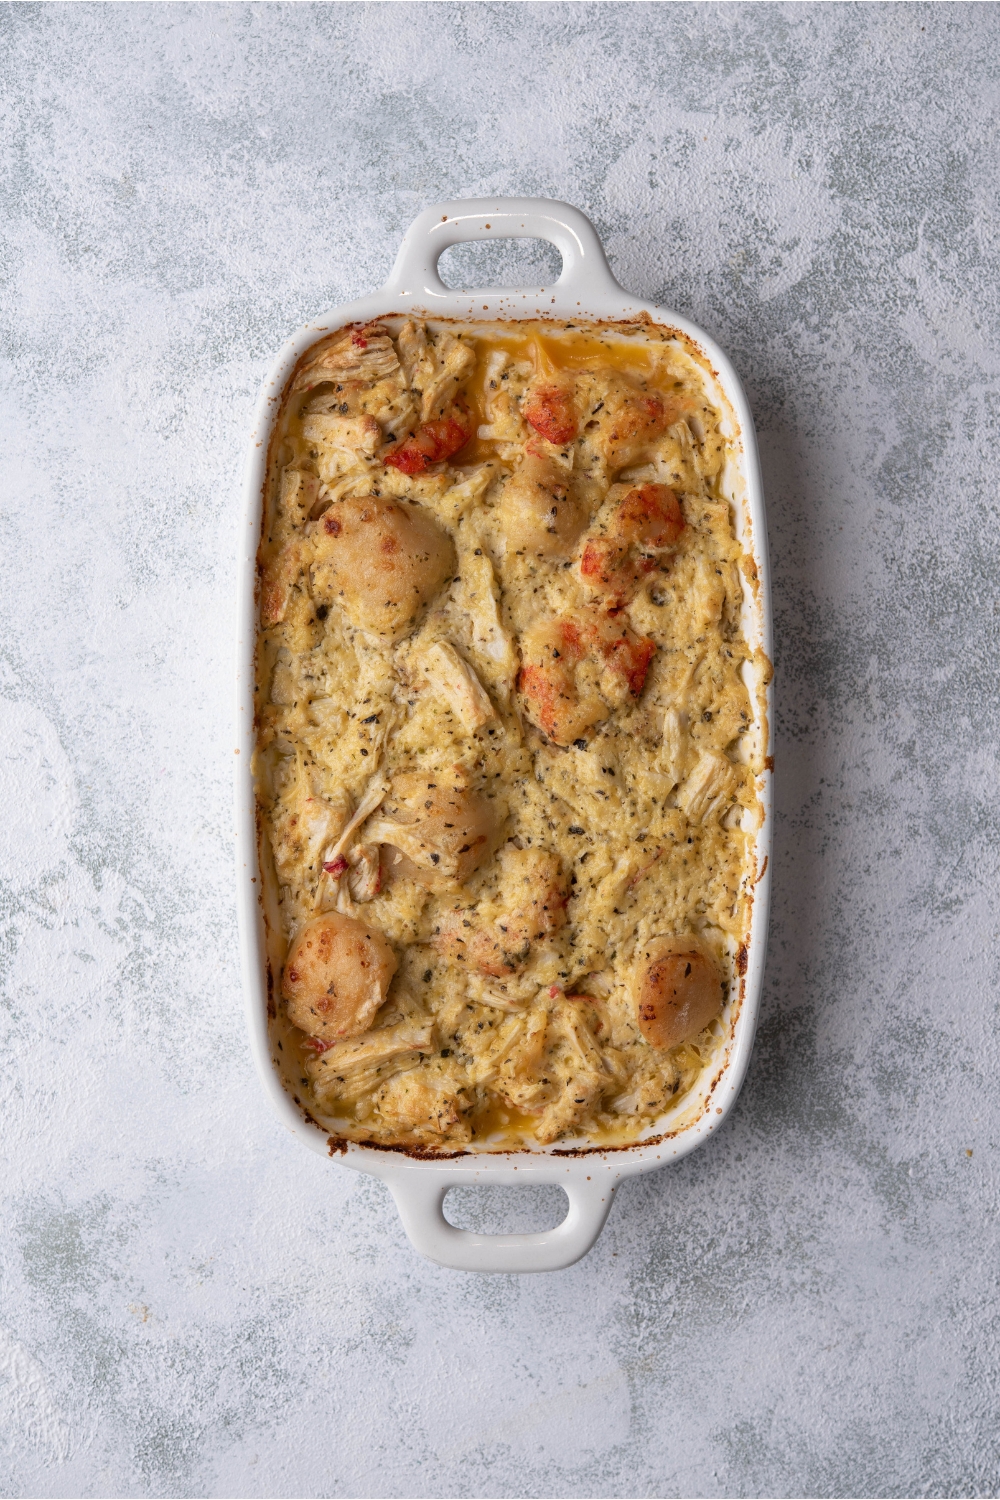 Seafood casserole in a white baking dish.